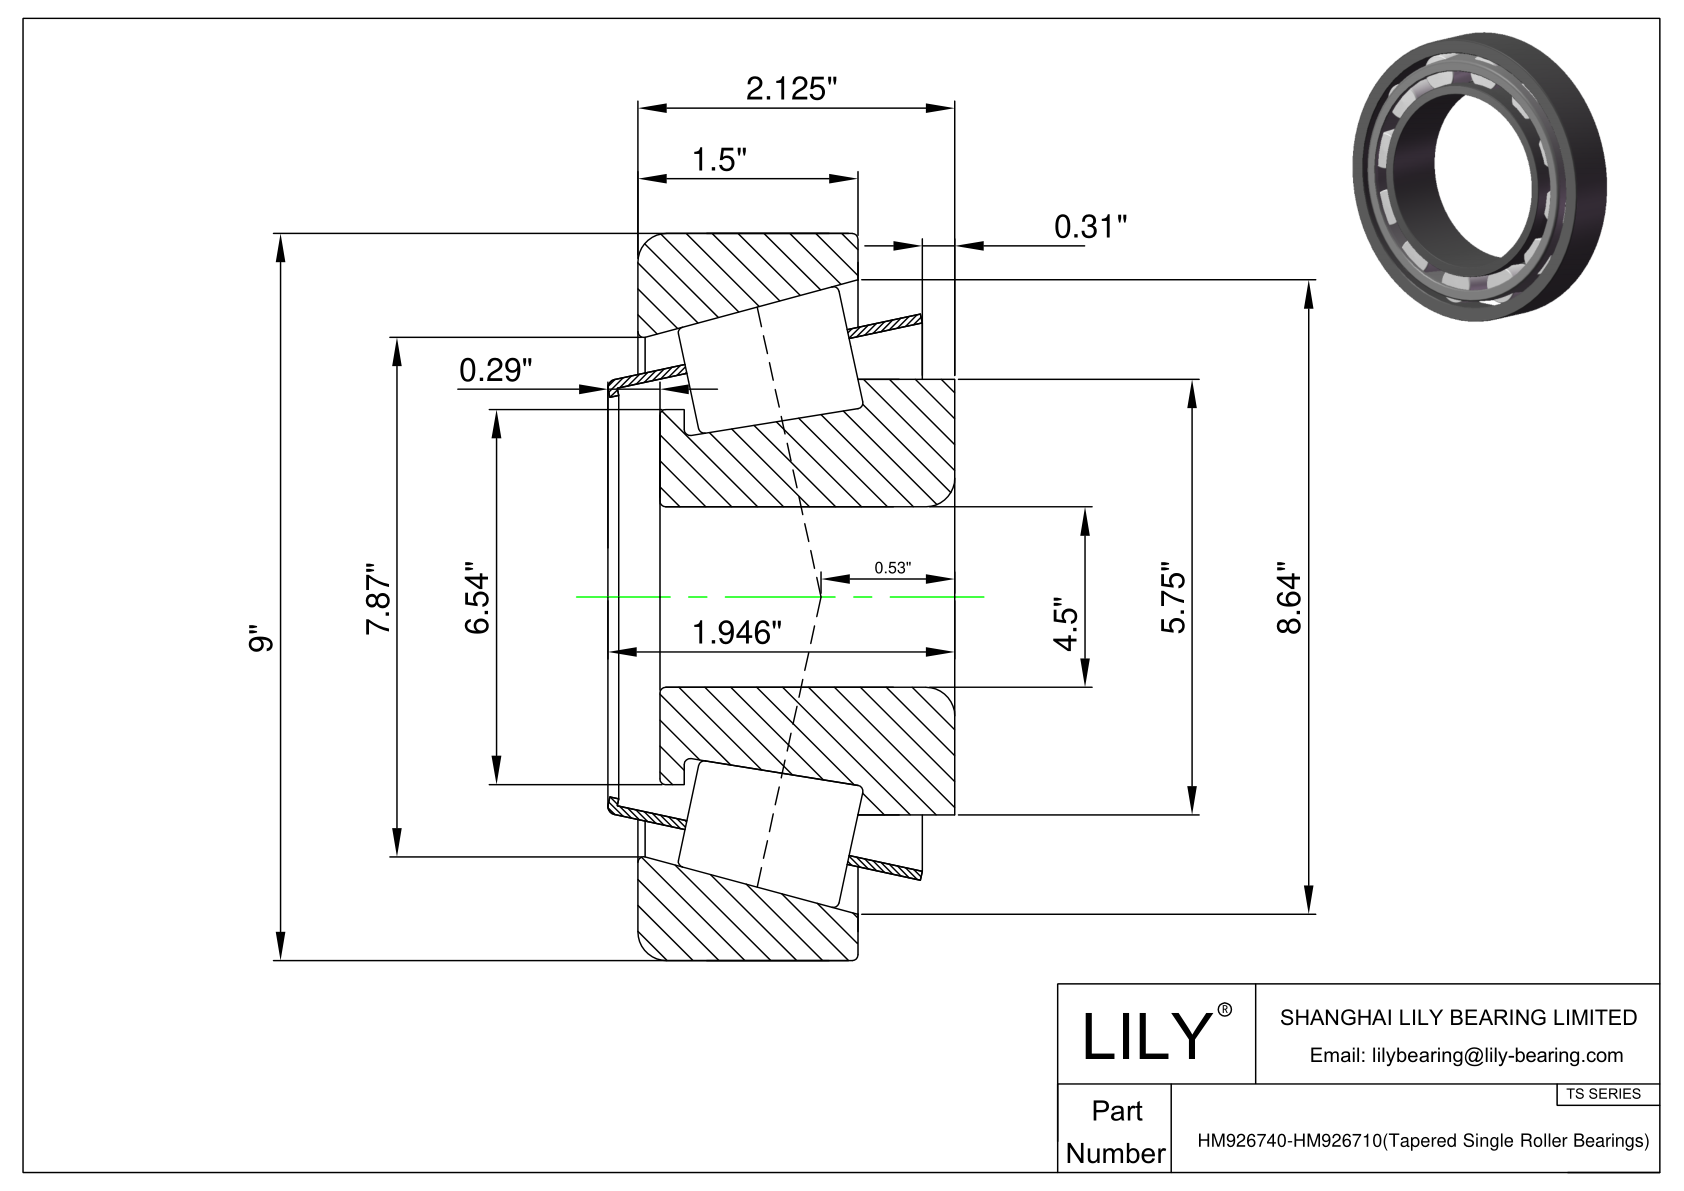 HM926740-HM926710 TS (Tapered Single Roller Bearings) (Imperial) cad drawing